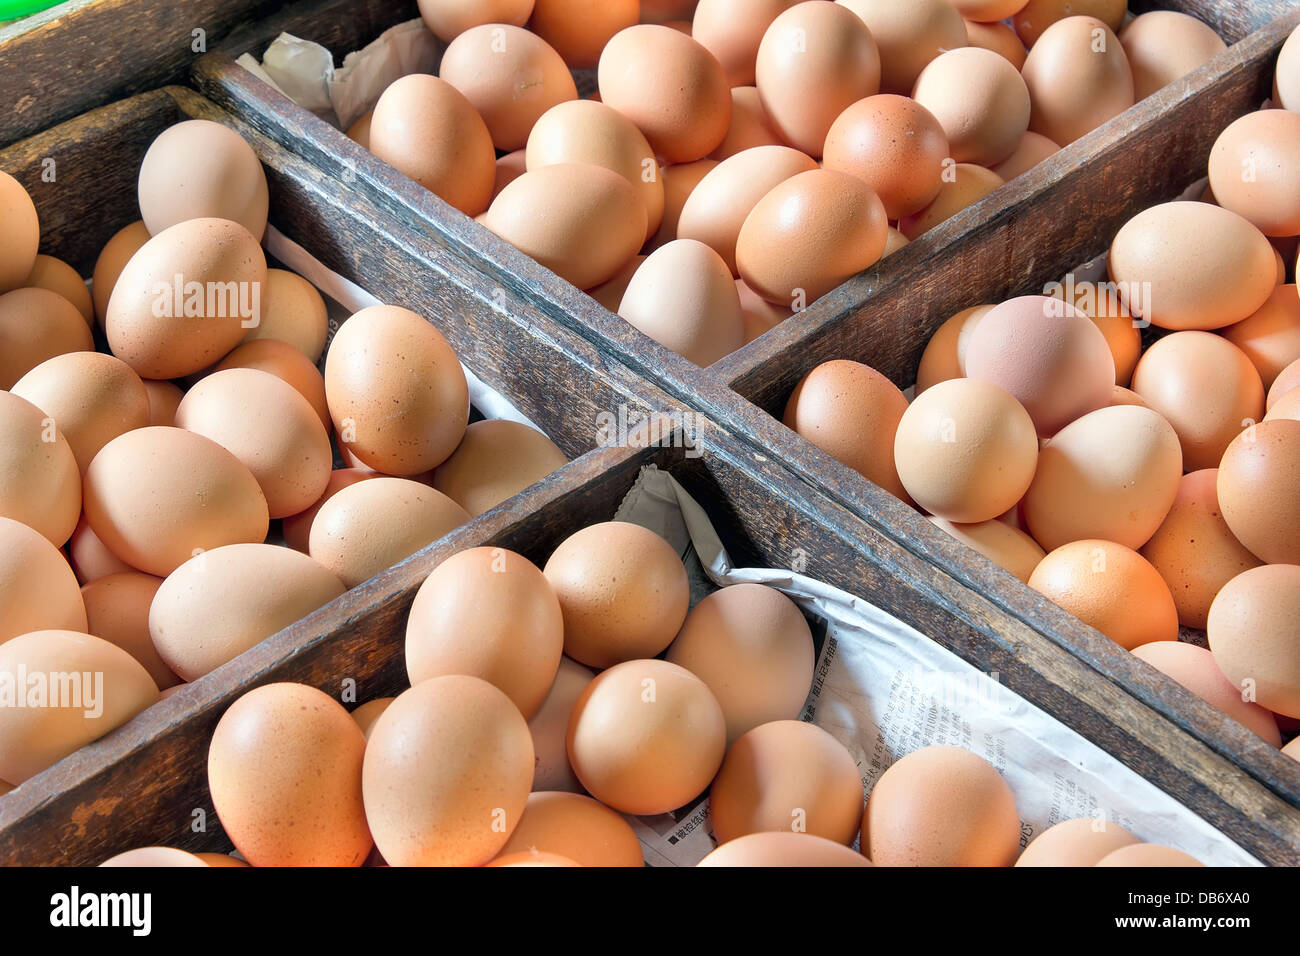 Chicken Egg Vendor with Eggs For Sale in Wooden Crates at Southeast Asia Wet Market Stock Photo